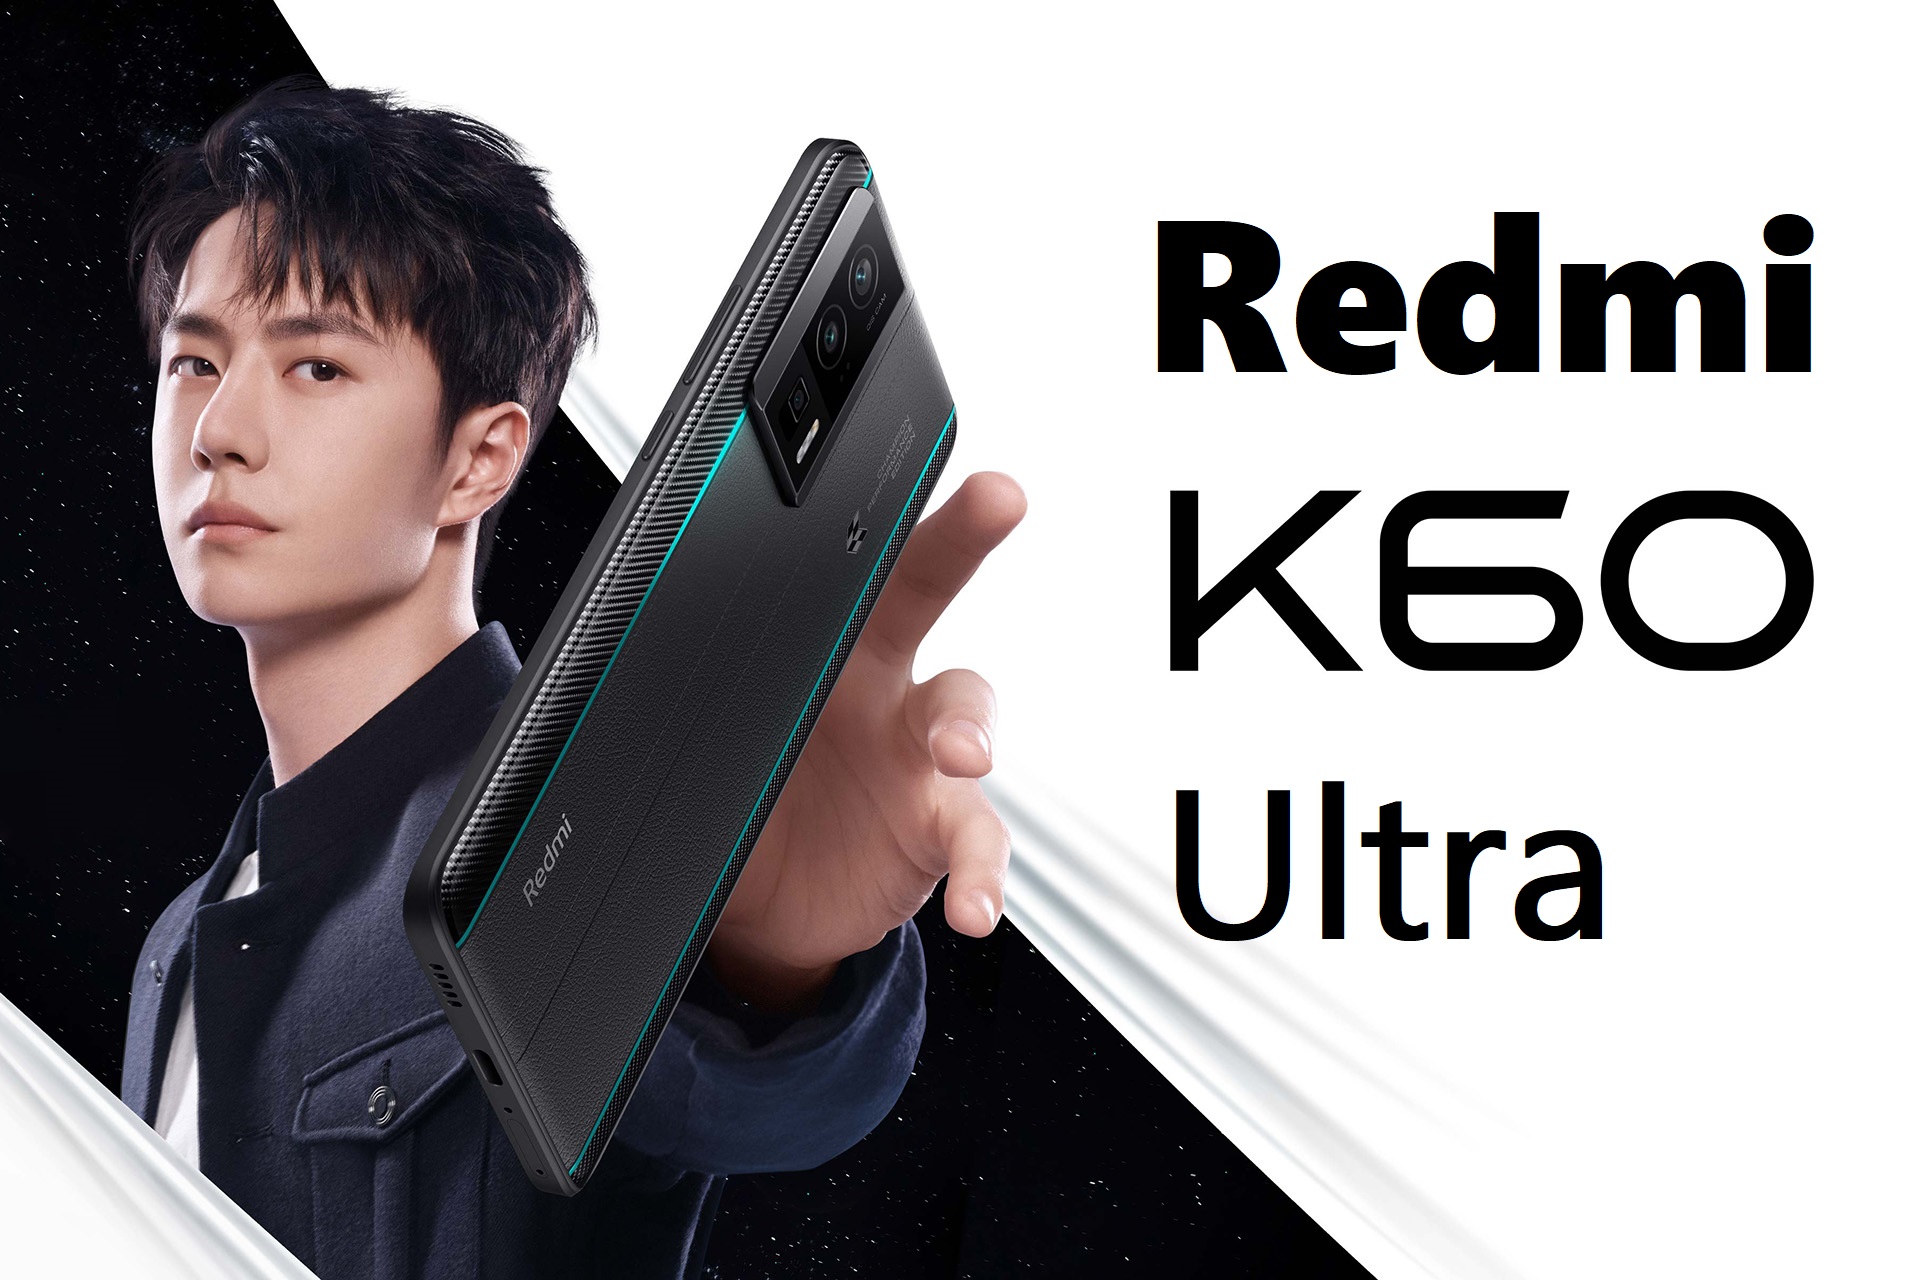 Redmi K60 Ultra certified with 120W charging